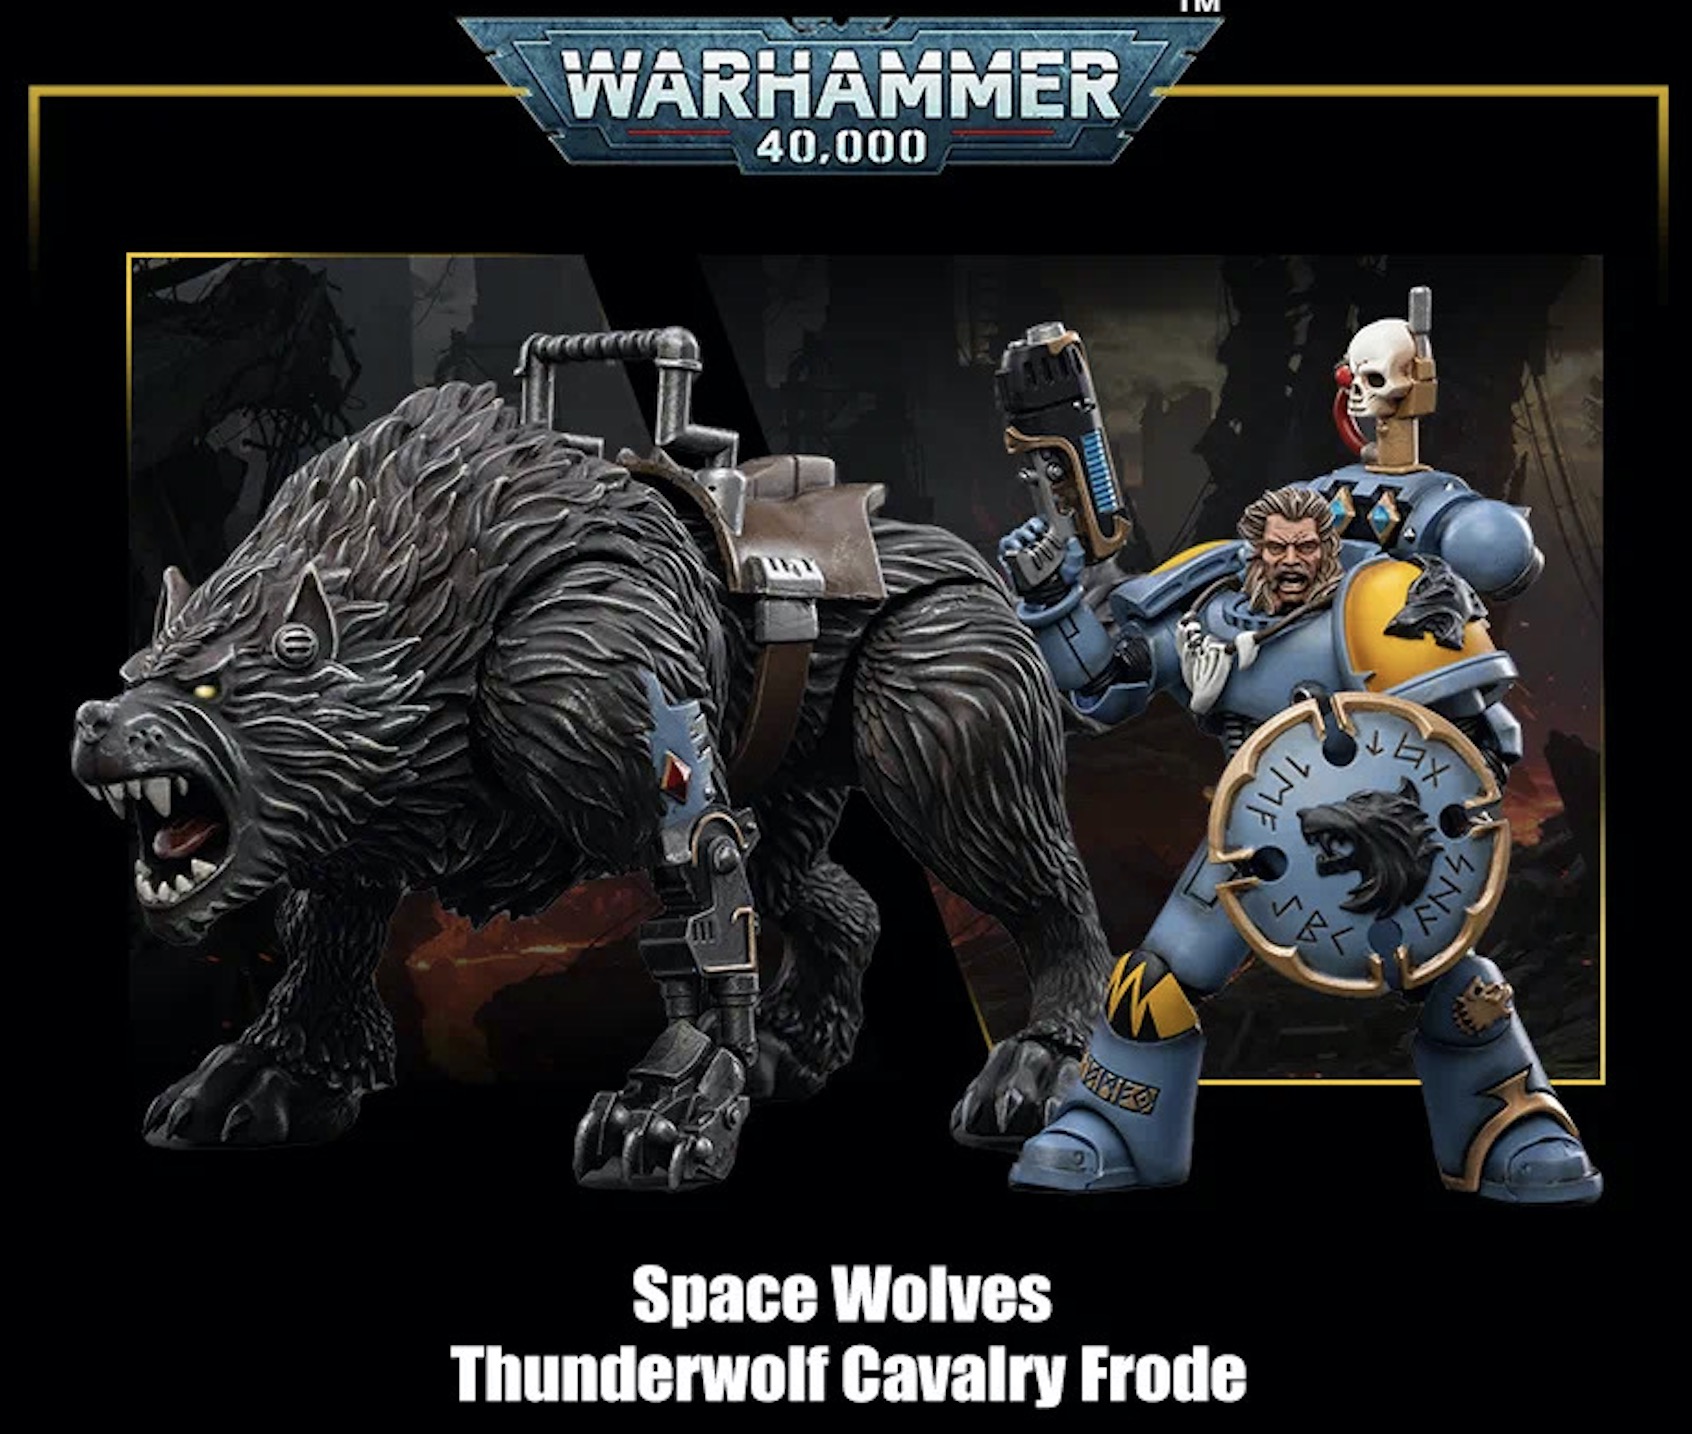 JOYTOY 1/18 Action Figure Space Wolves Thunderwolf Cavalry Frode